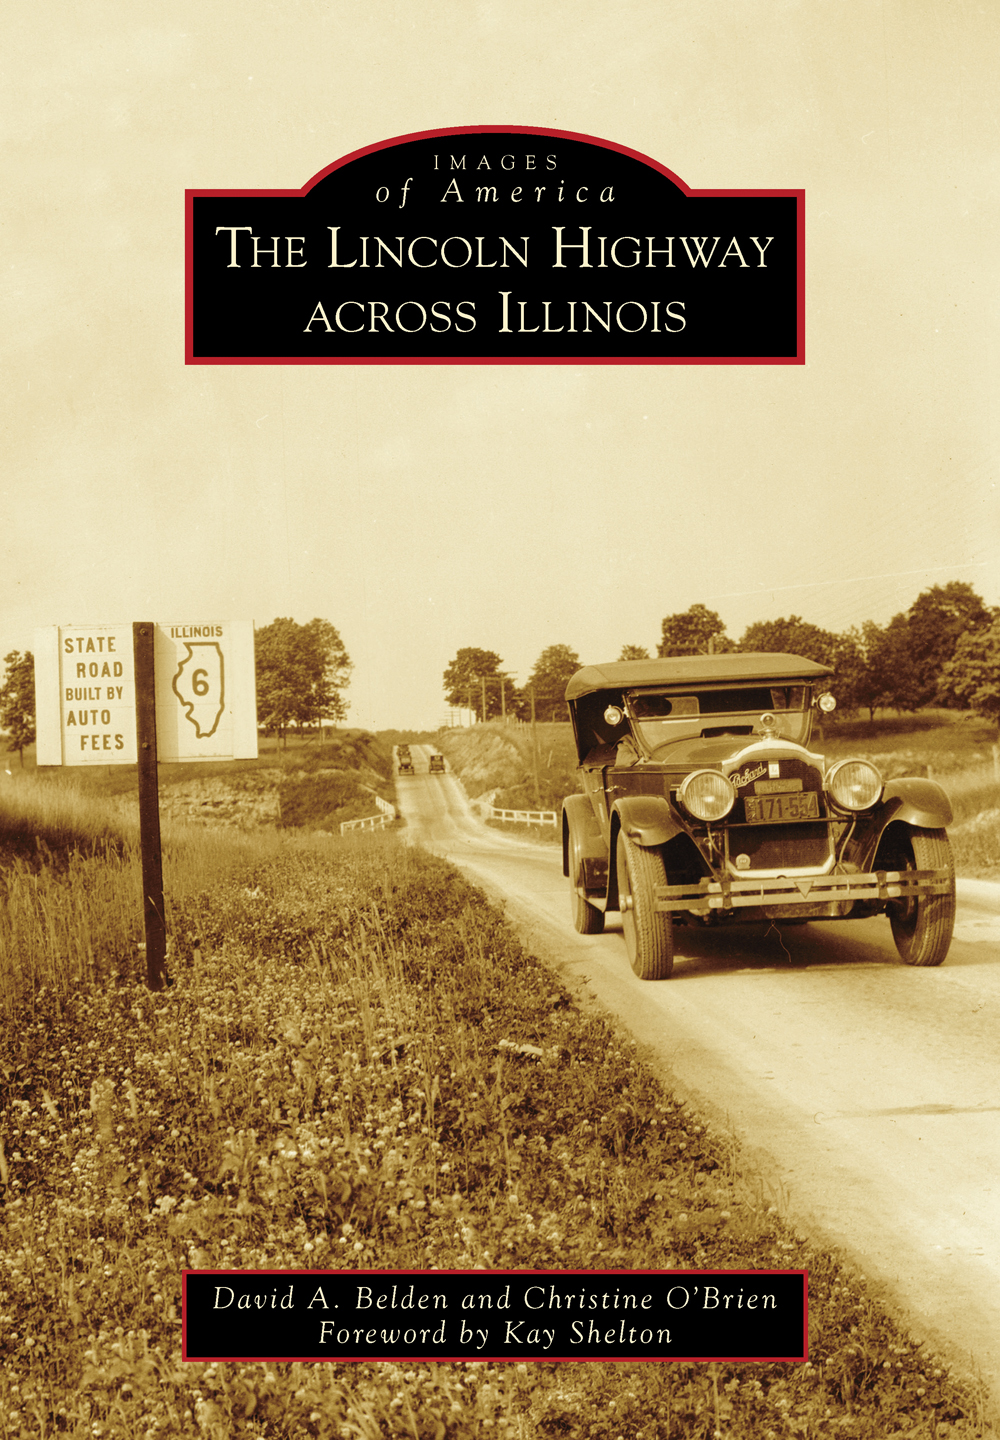 IMAGES of America THE LINCOLN HIGHWAY ACROSS ILLINOIS Affectionately known - photo 1